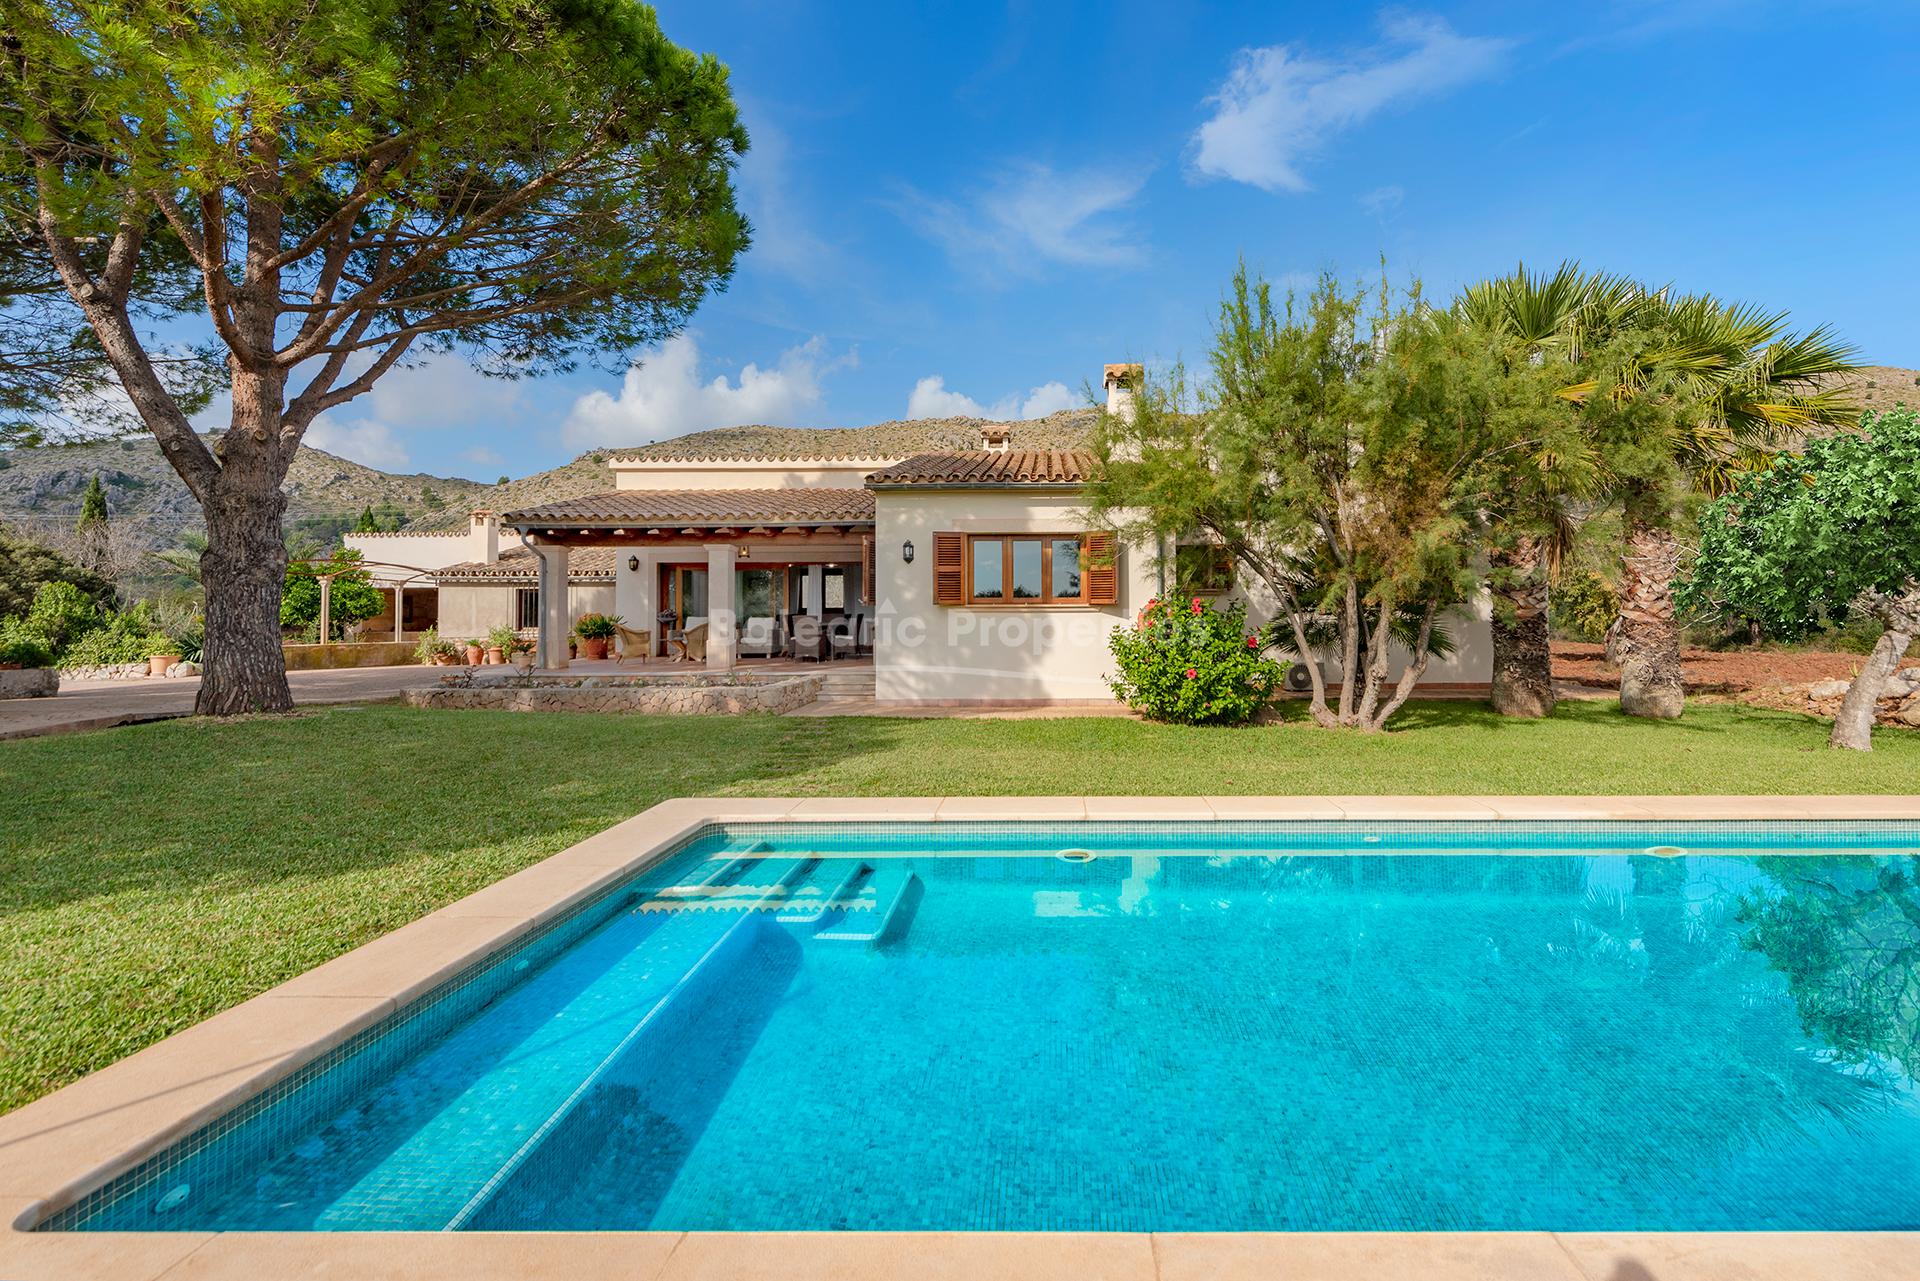 Lovely countryside villa with holiday rental license for sale in Pollensa, Mallorca